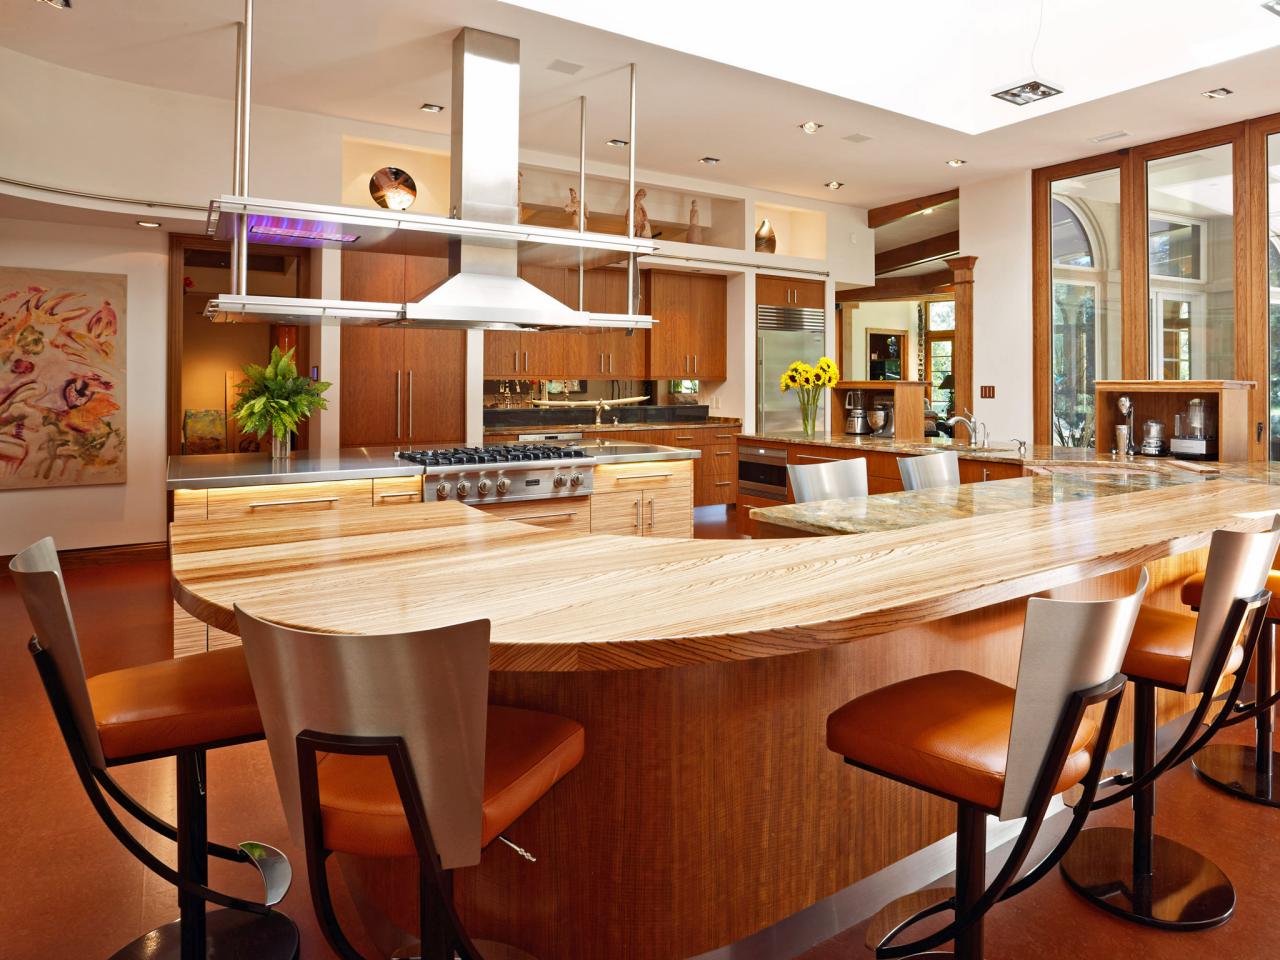 larger kitchen islands: pictures, ideas & tips from hgtv